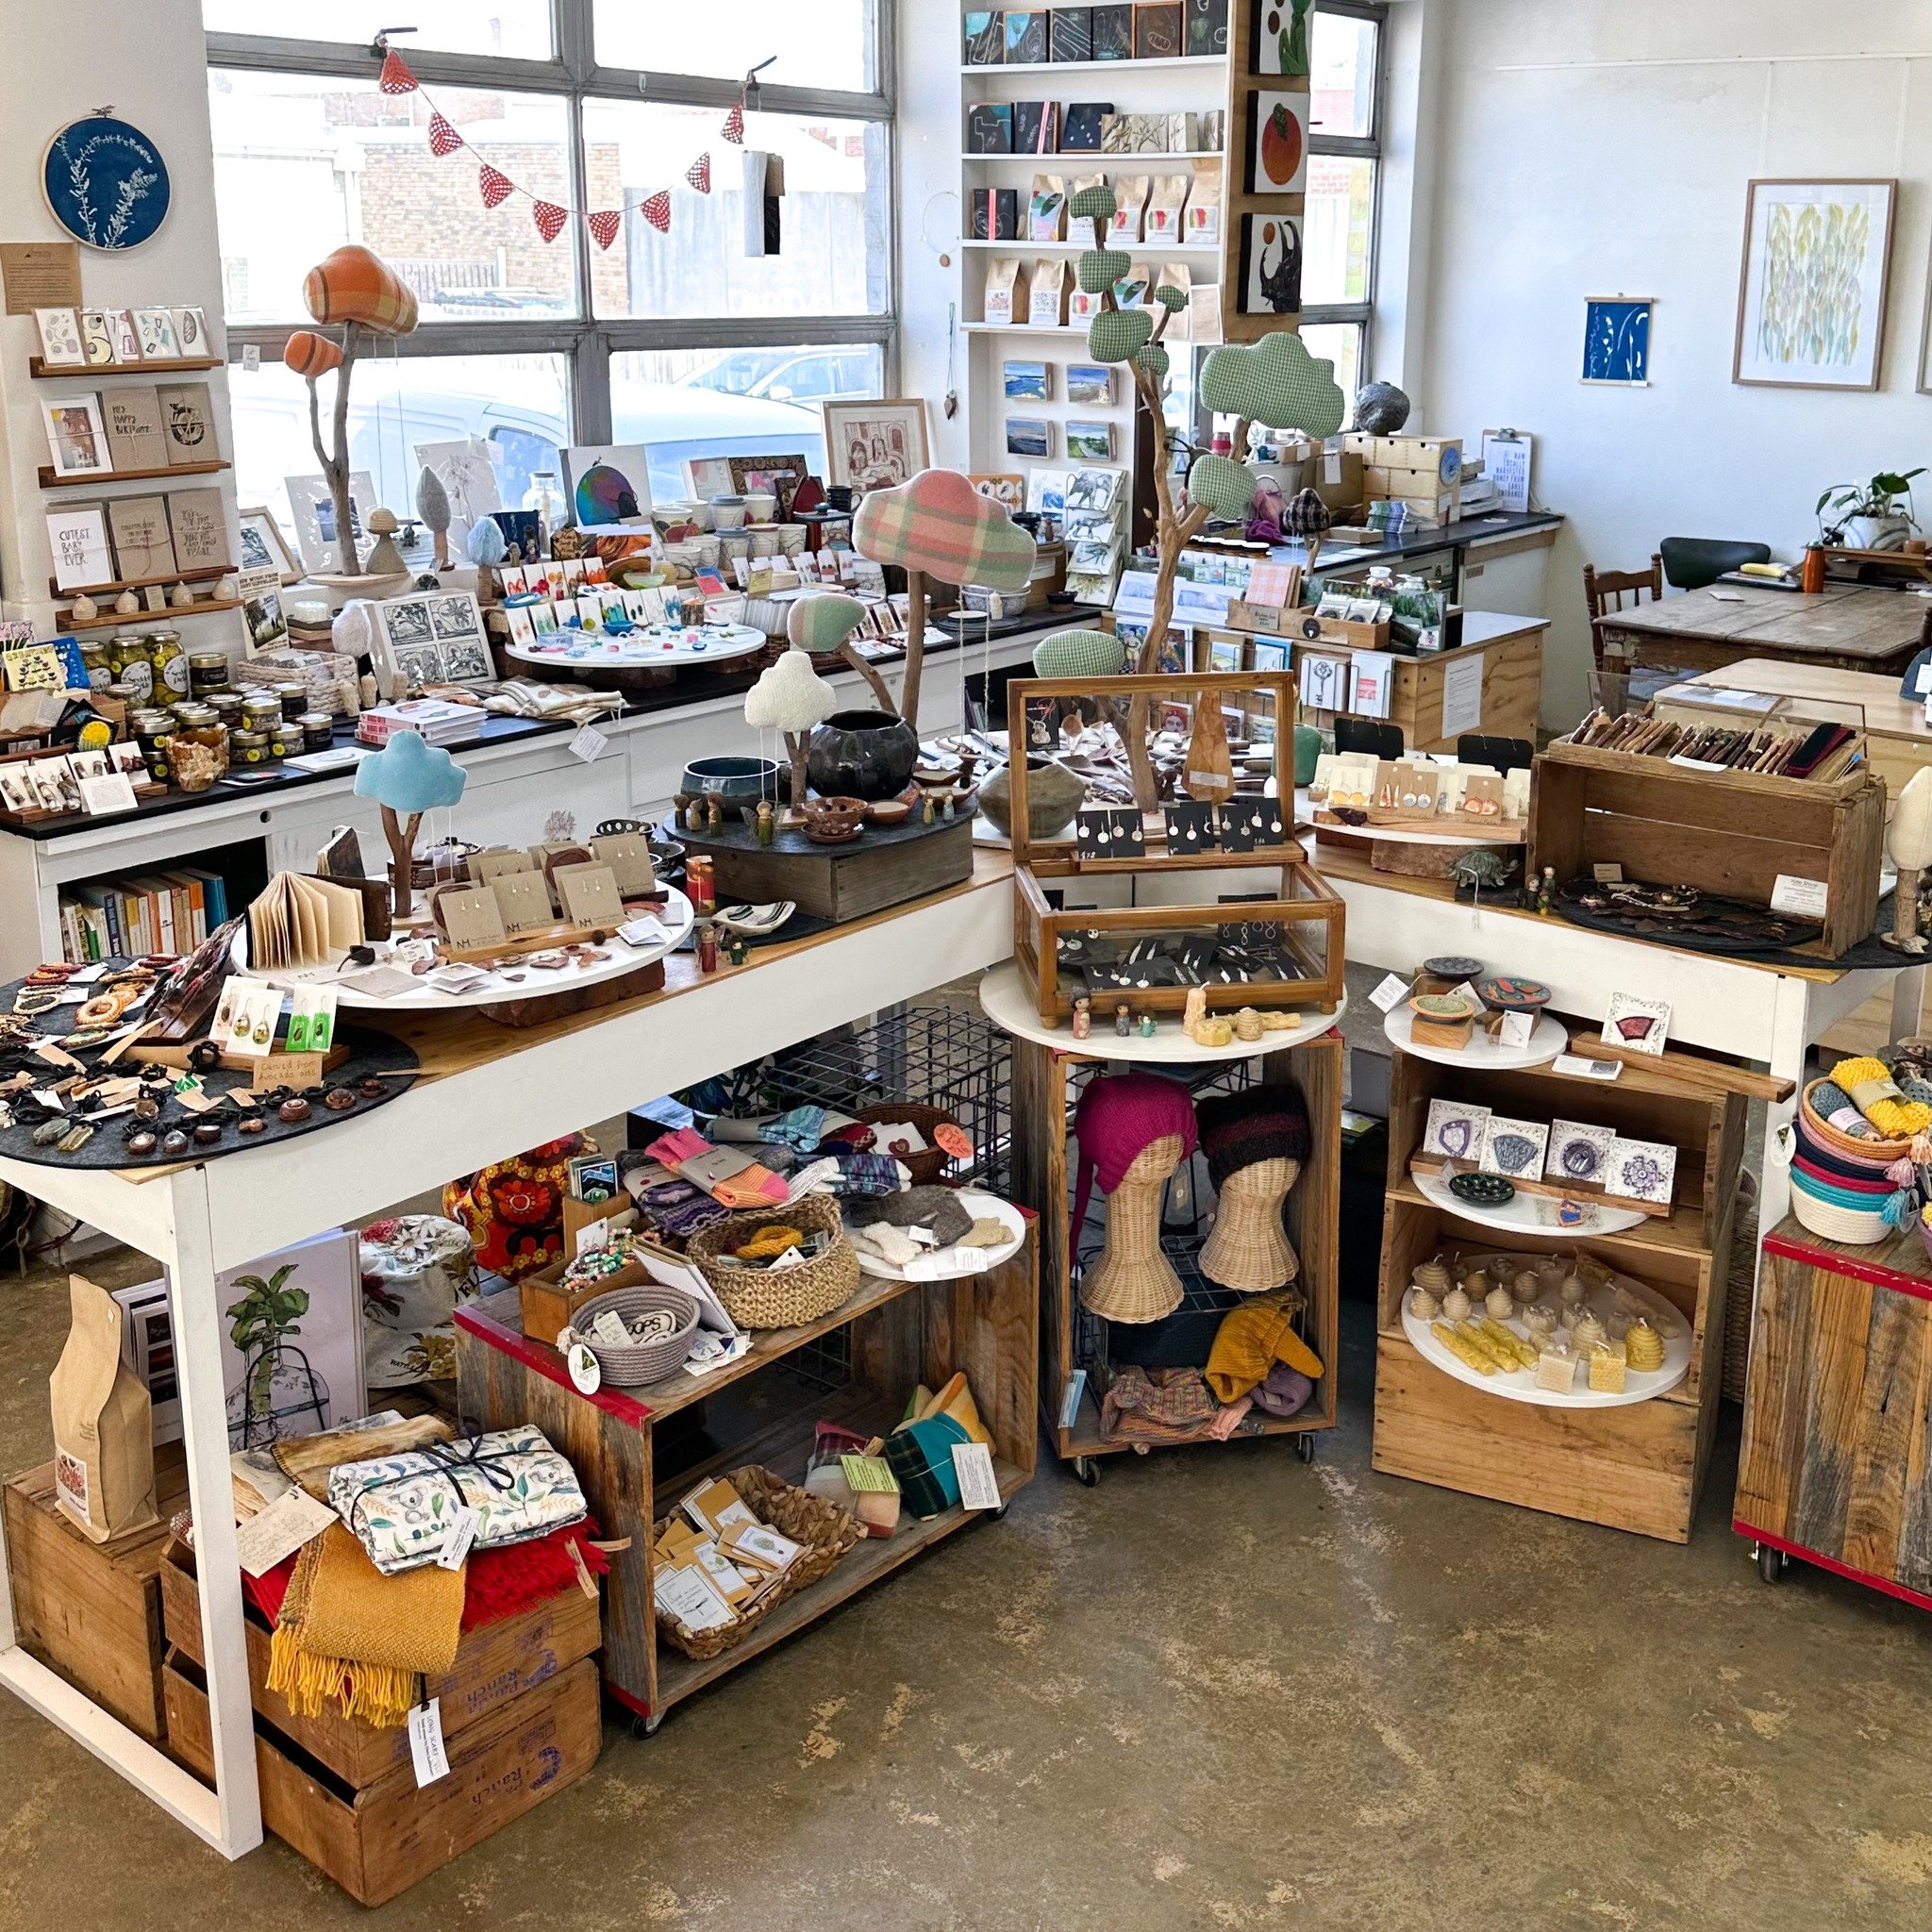 With thanks to our lovely shop guardian Julia, we are open this afternoon from 1-5pm 🥰

PS Have you seen our newly rearranged shop displays? You&rsquo;re sure to find new treasures ❤️

#foundrybairnsdale #visiteastgippland #artistcollective #madebyl